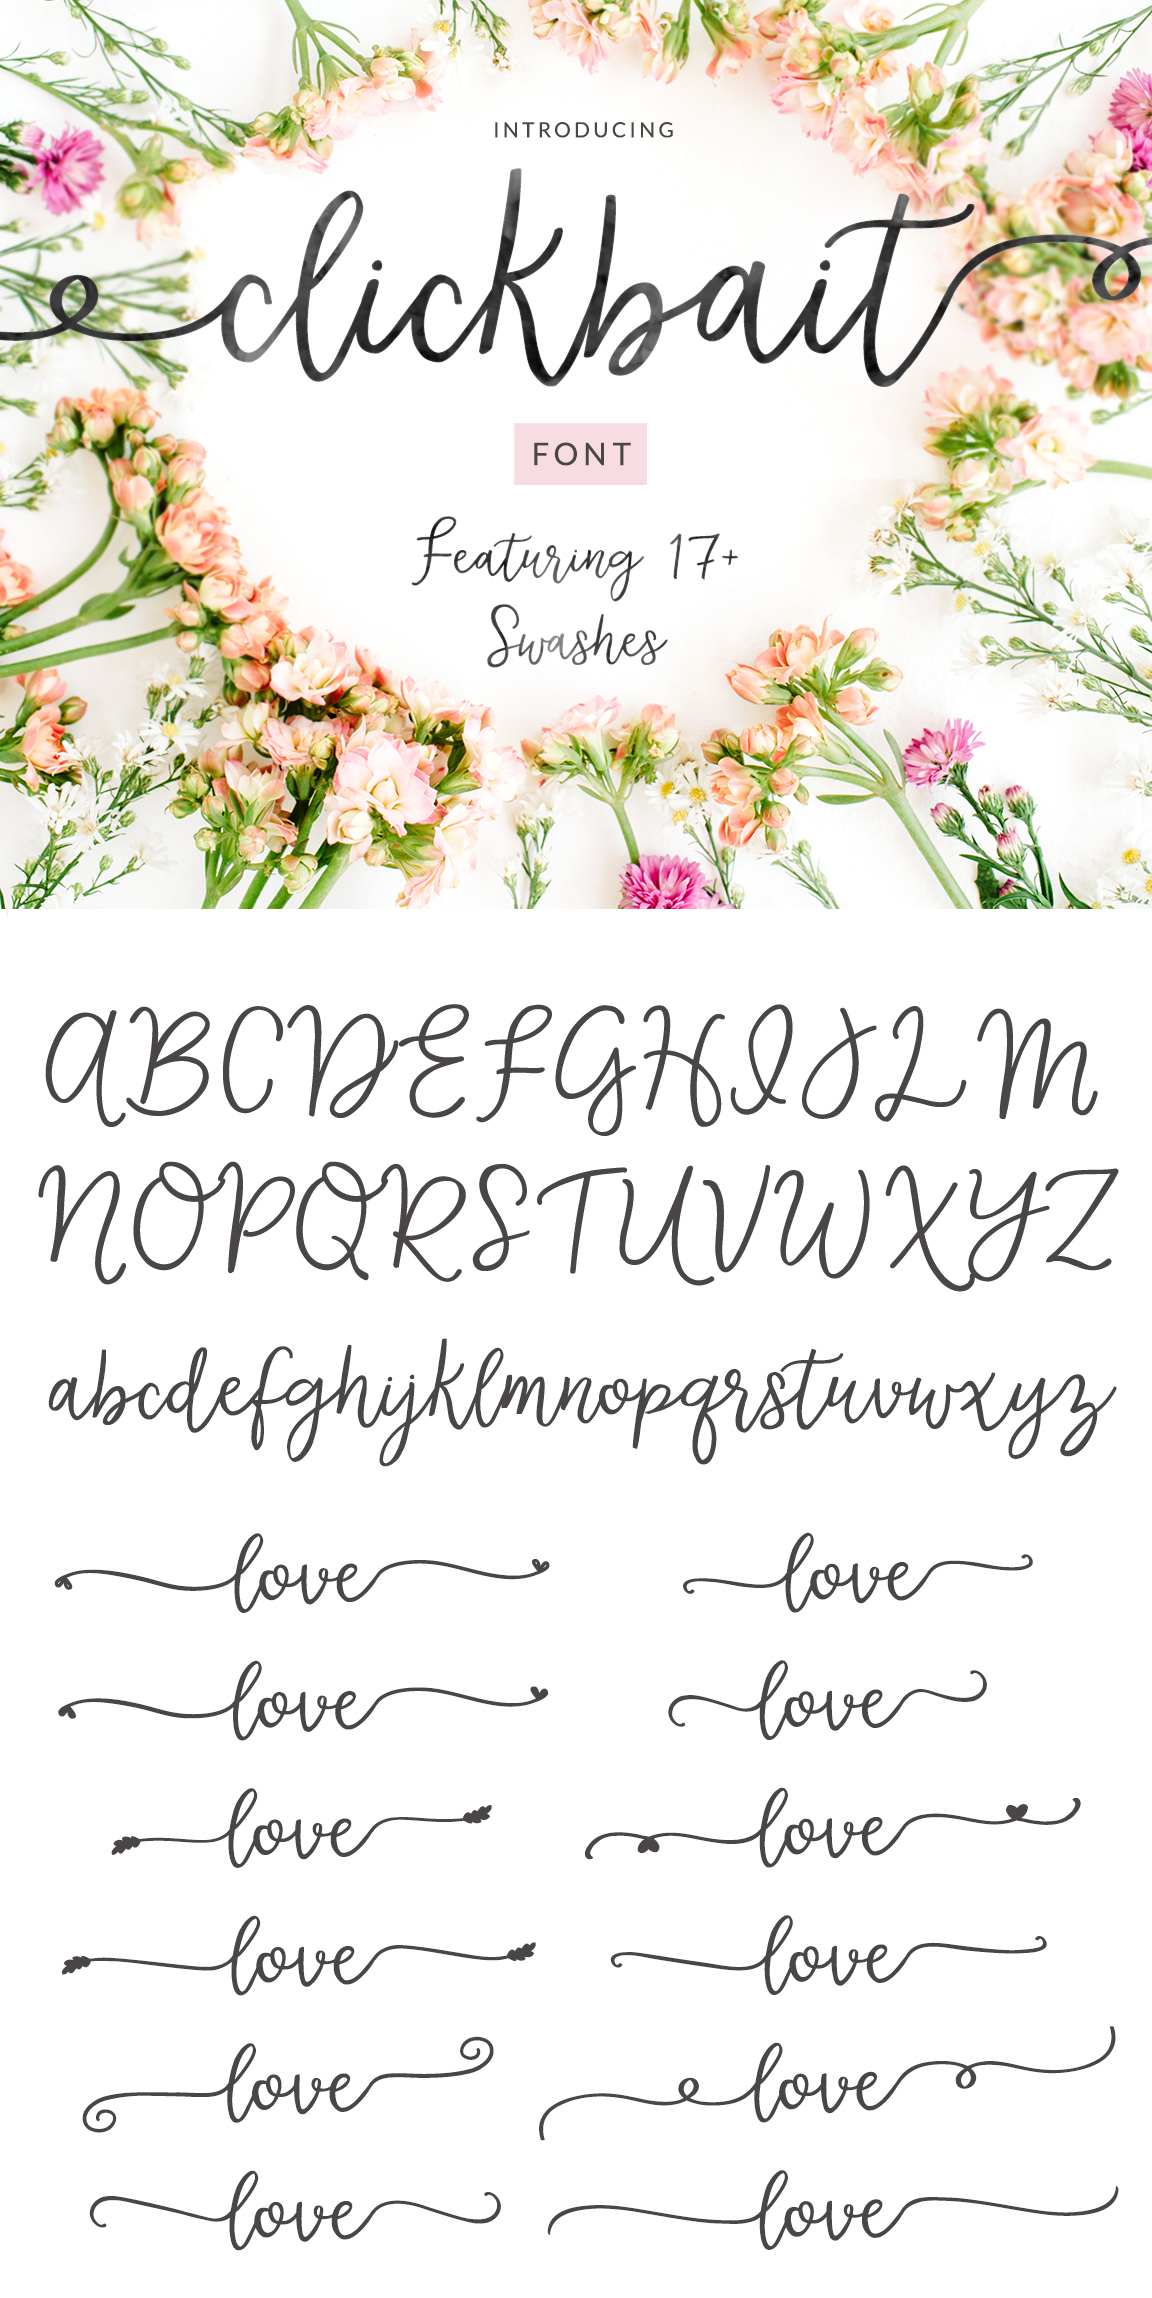 Clickbait Cute Swash Calligraphy Font - Full Version - Angie Makes